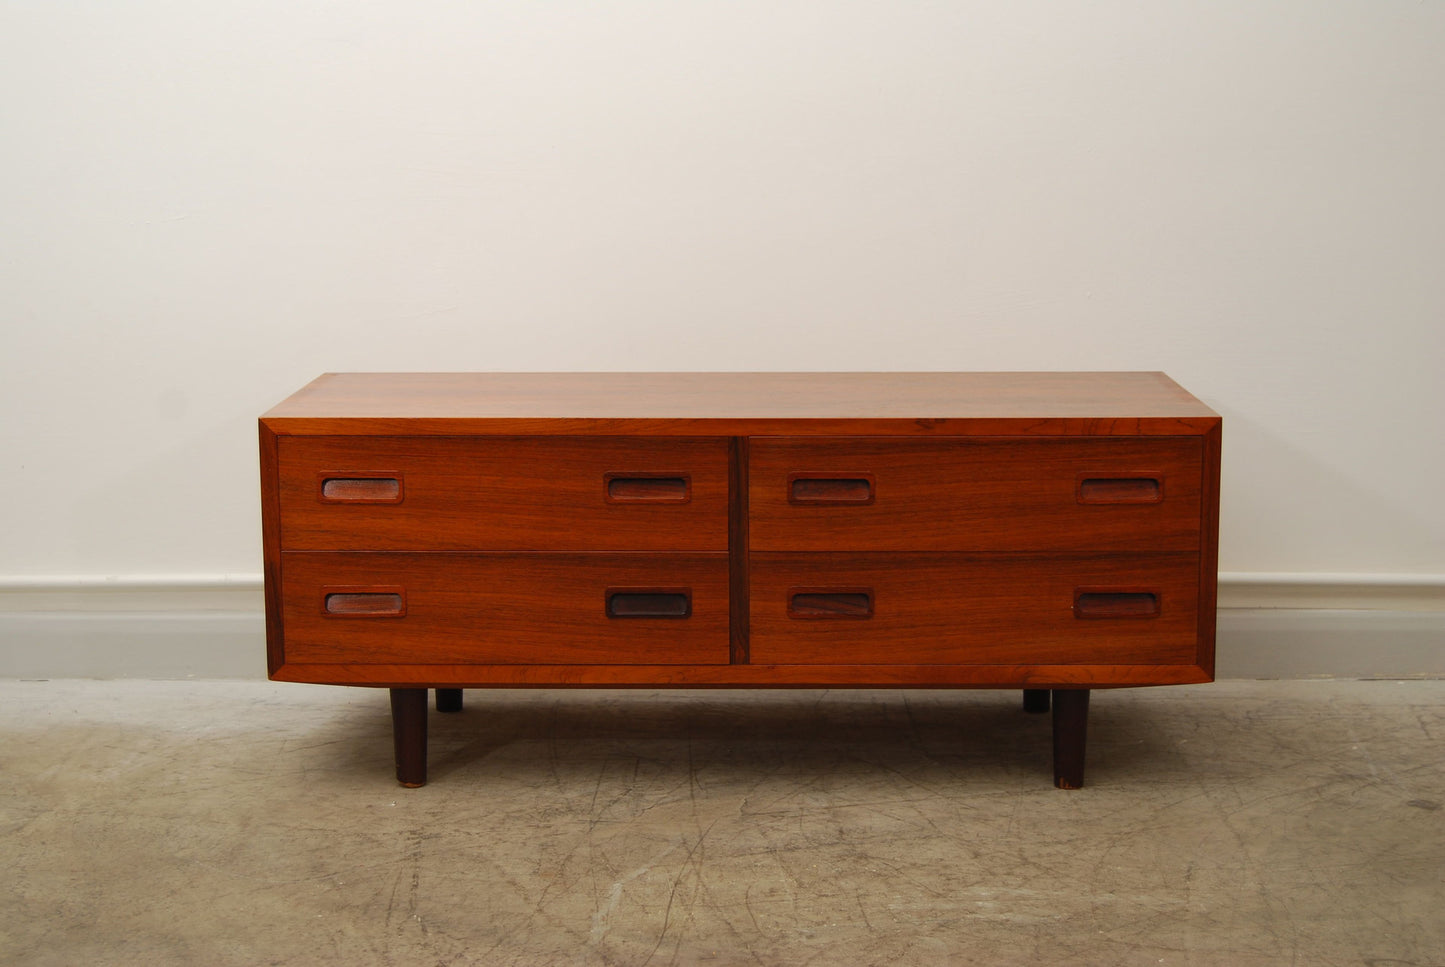 Rosewood television table by Poul Hundevad